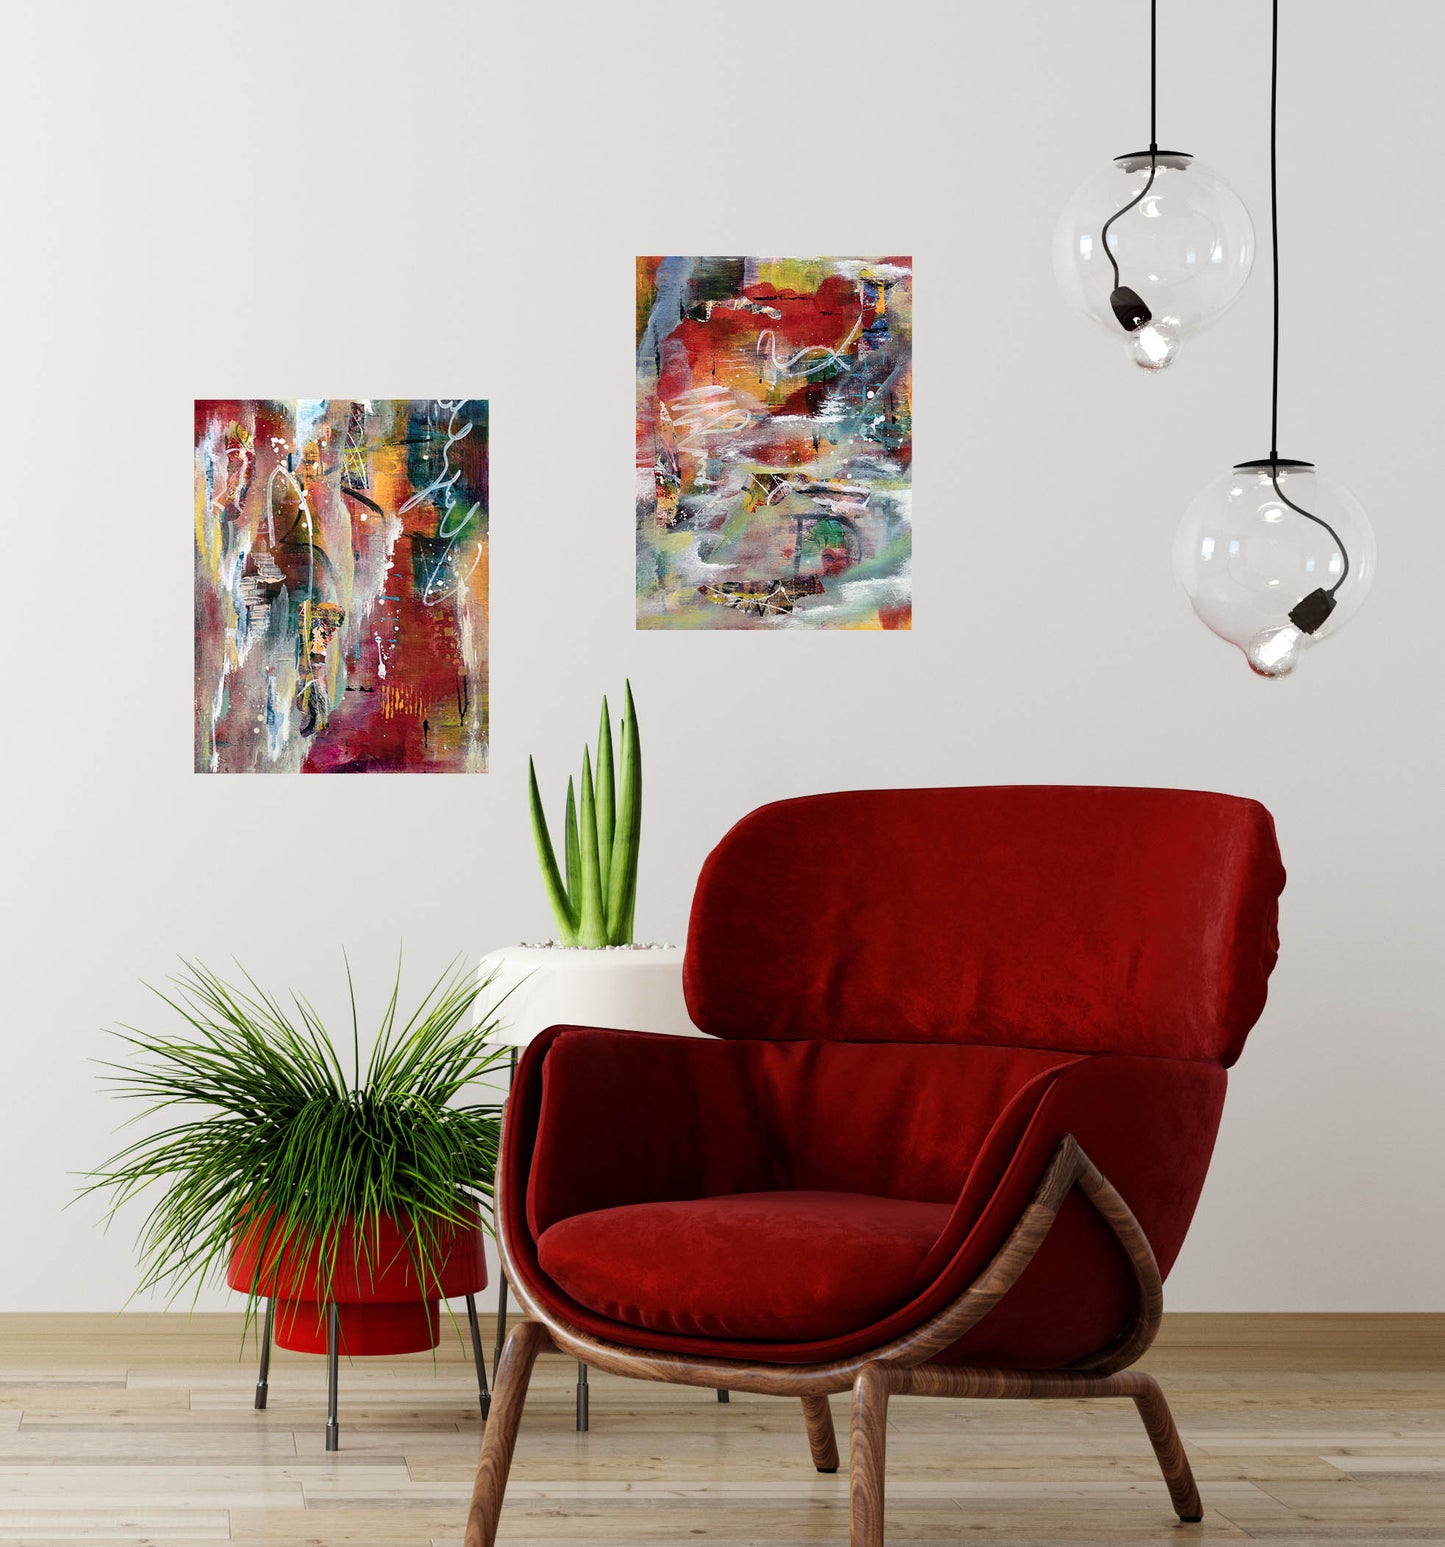 Red Hots #2 - Four Pieces - Sold in Sets of 2 (24x24 Gallery Wrapped Canvas)